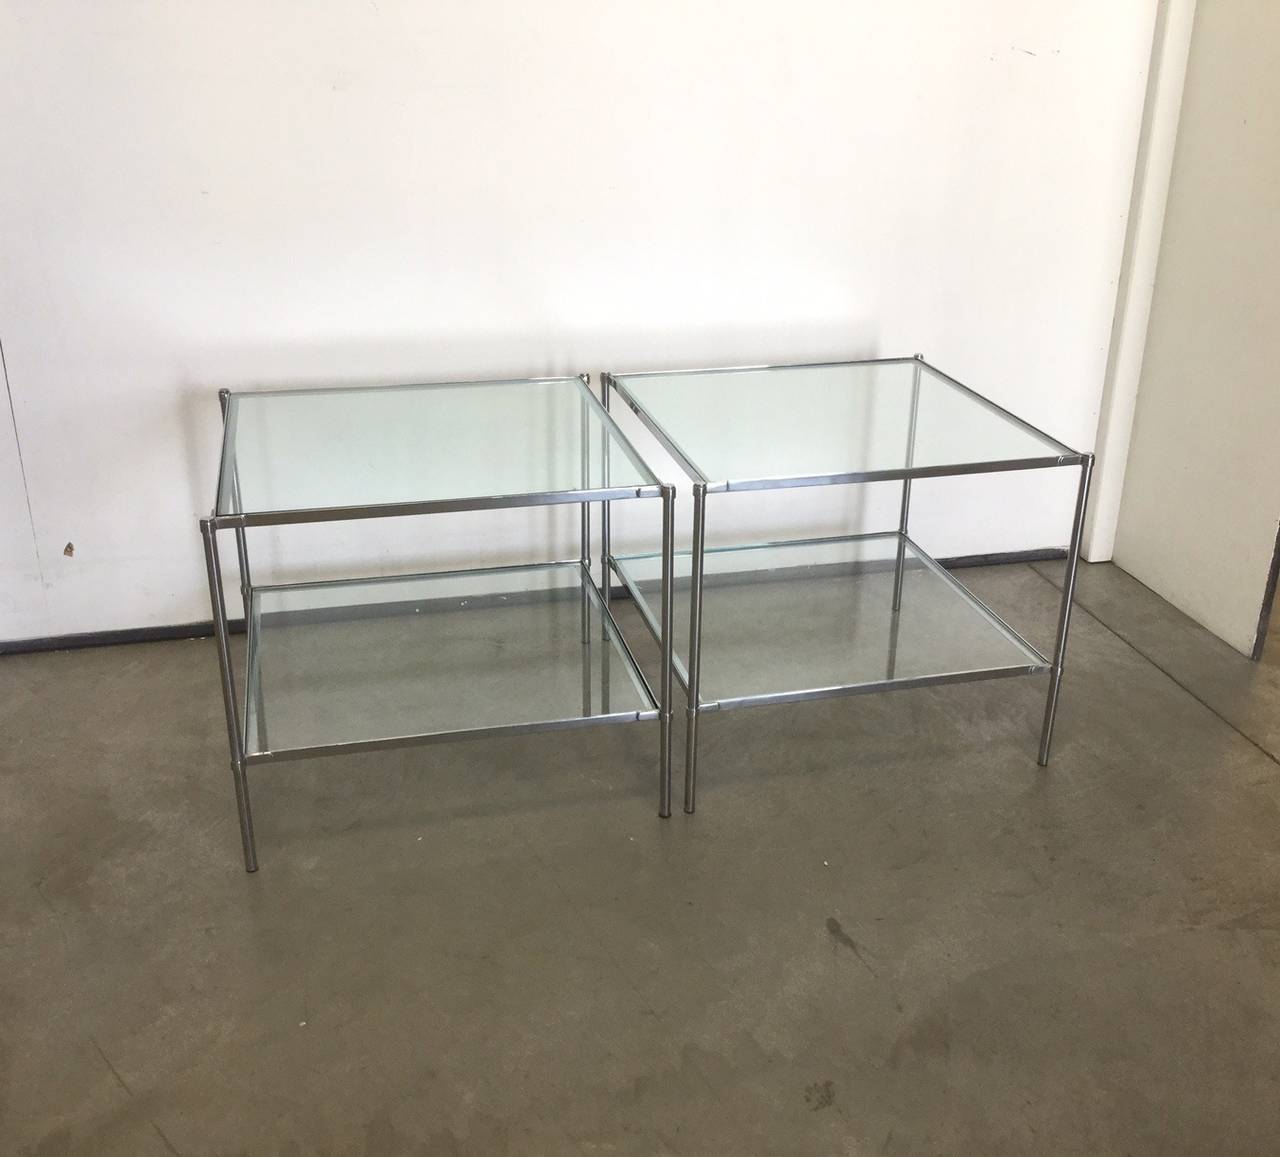 Set composed by four low tables , two bigger ( cm 60 x cm 60 )  and two little ones ( cm 40 x cm 40 ) 
The structure of the table is made of tubular steel with special screw connections 
Two glass shelves each table 
Designed by Luigi Caccia